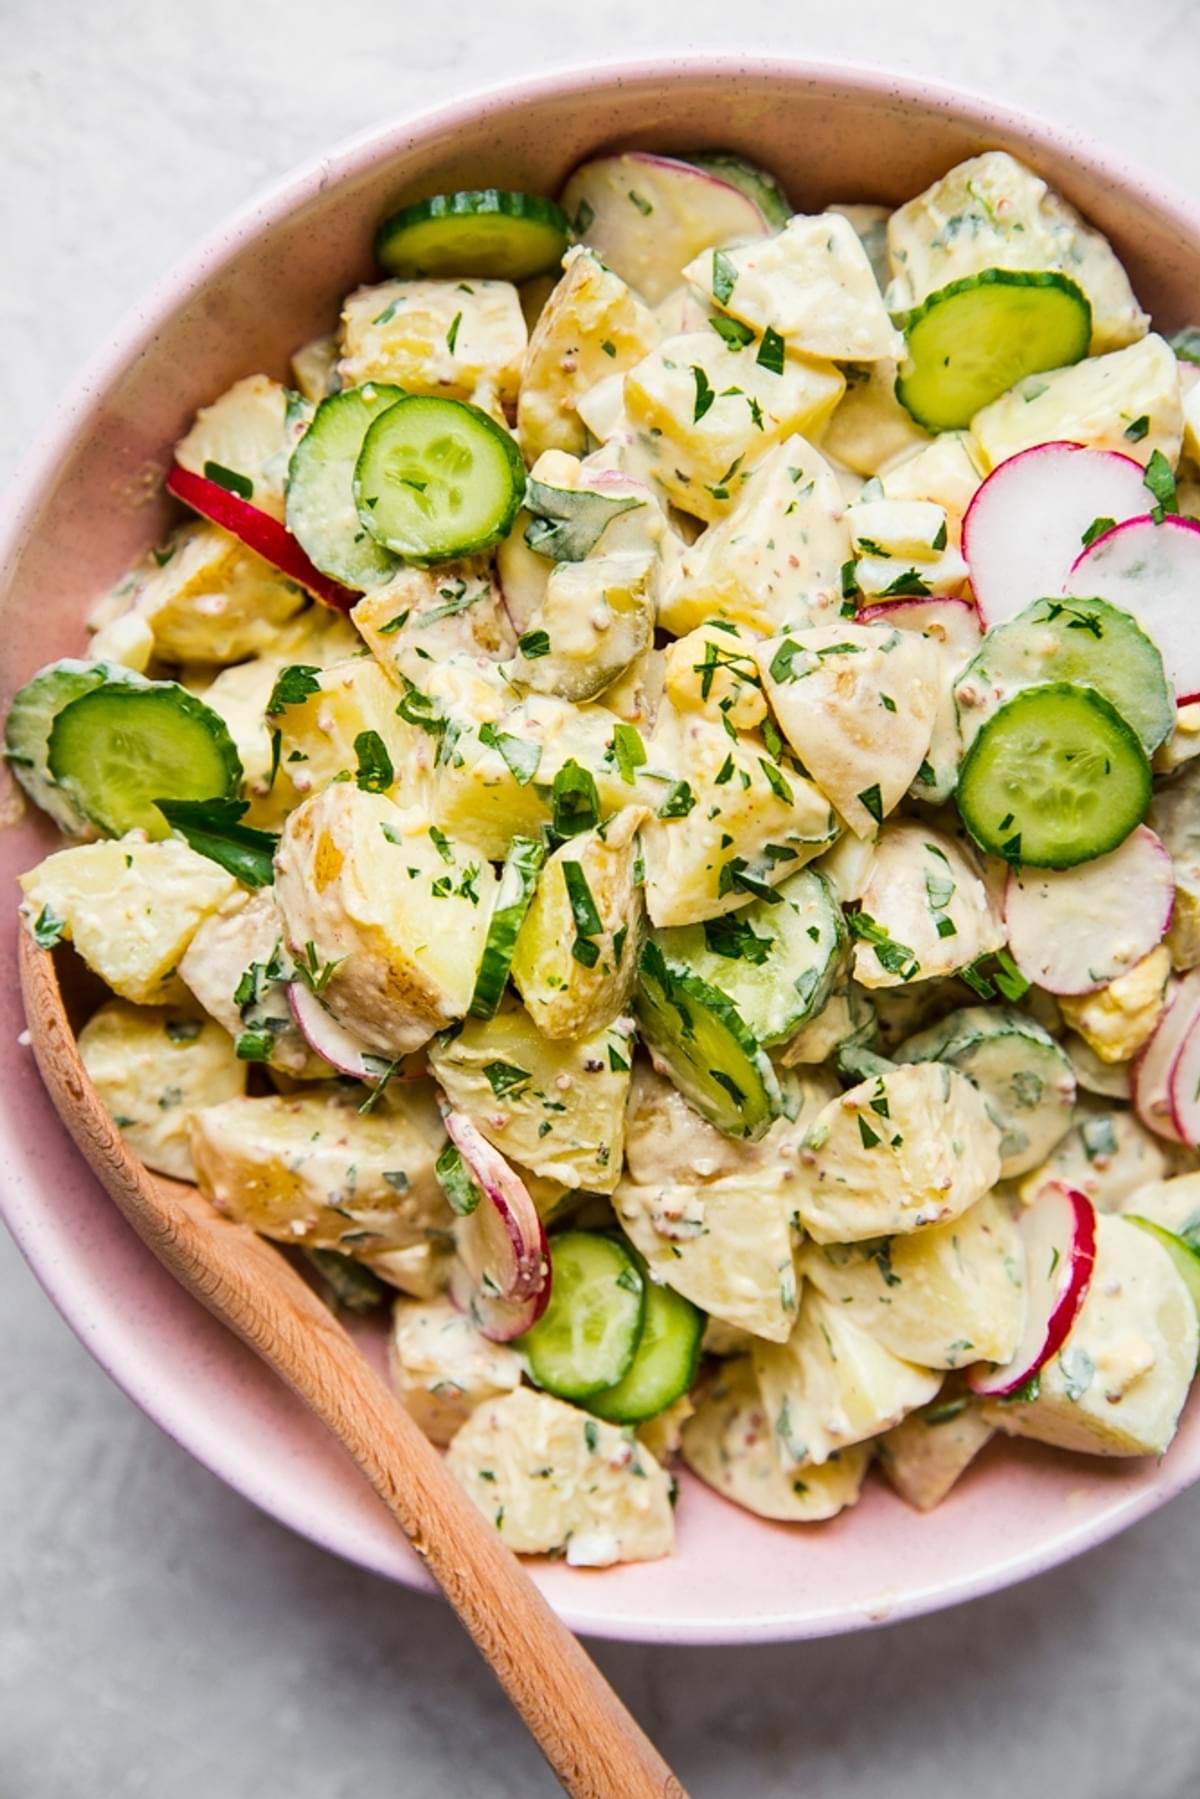 Easy potato salad in a bpwl with a wooden spoon